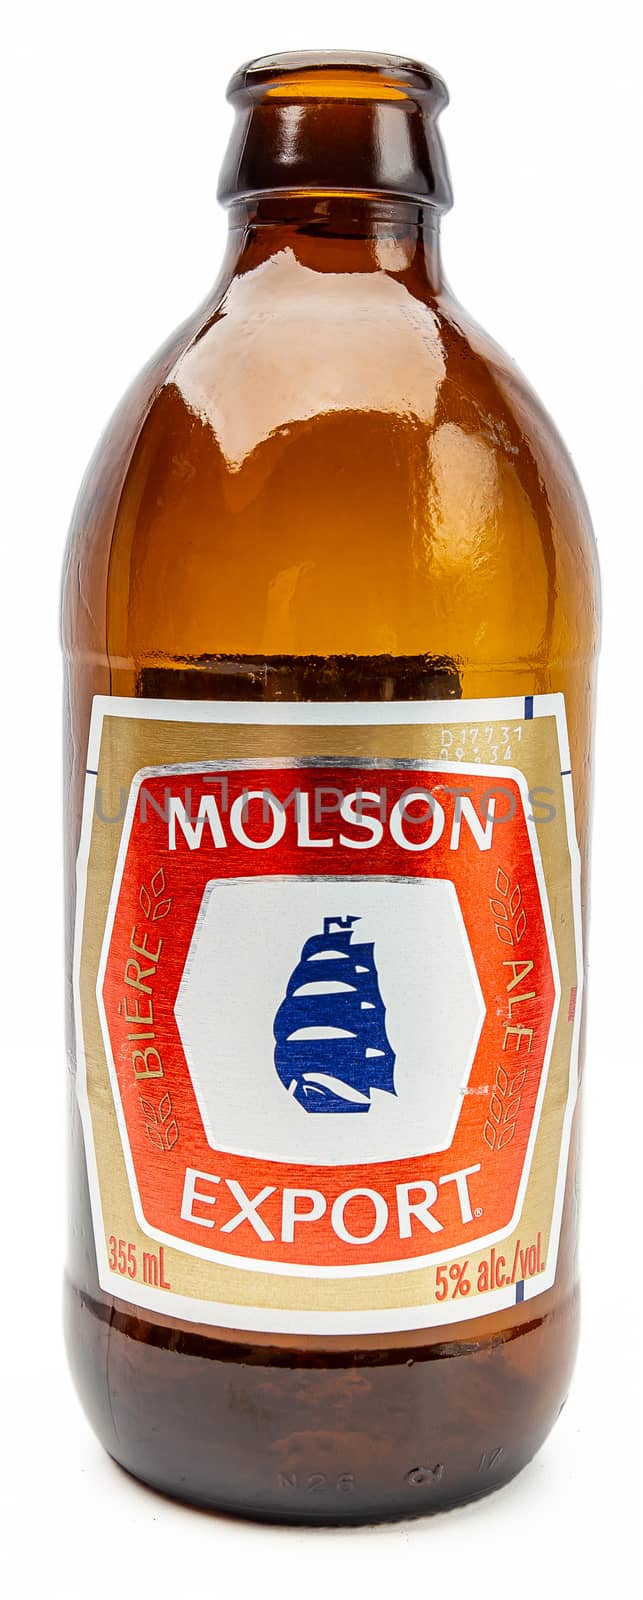 Old Molson Export beer bottle isolated against white background